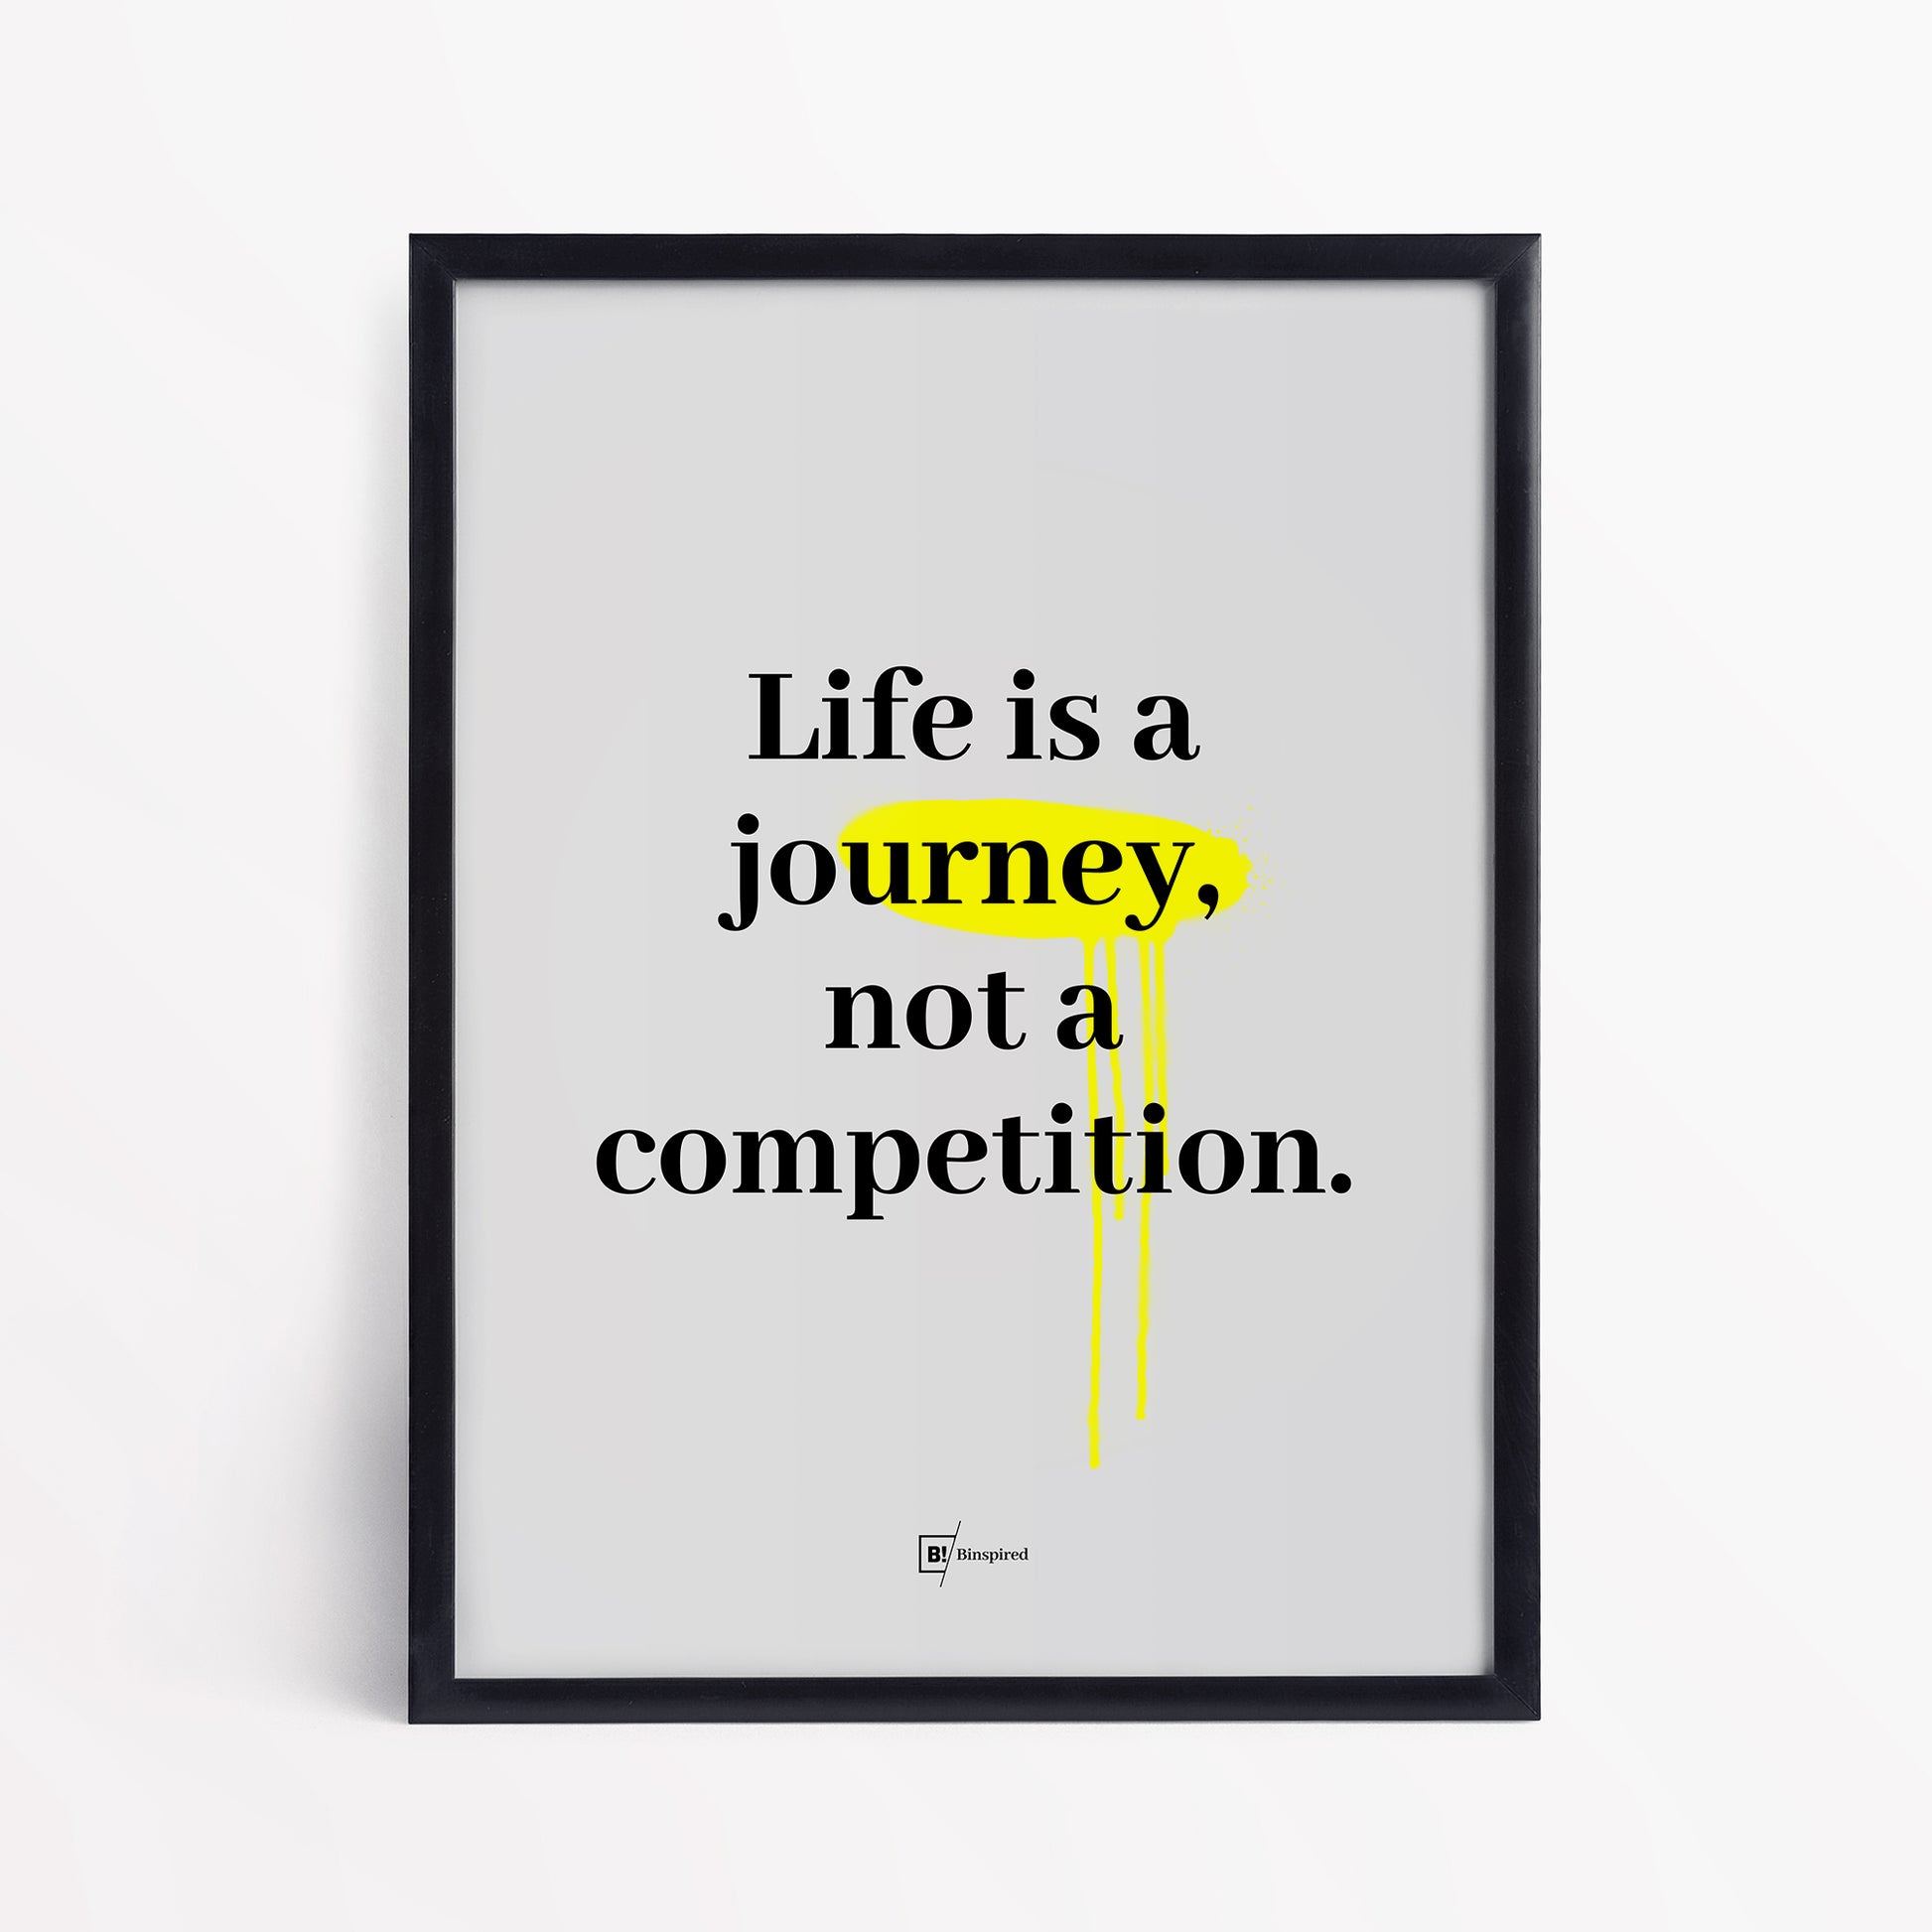 Life is a journey, not a competition.